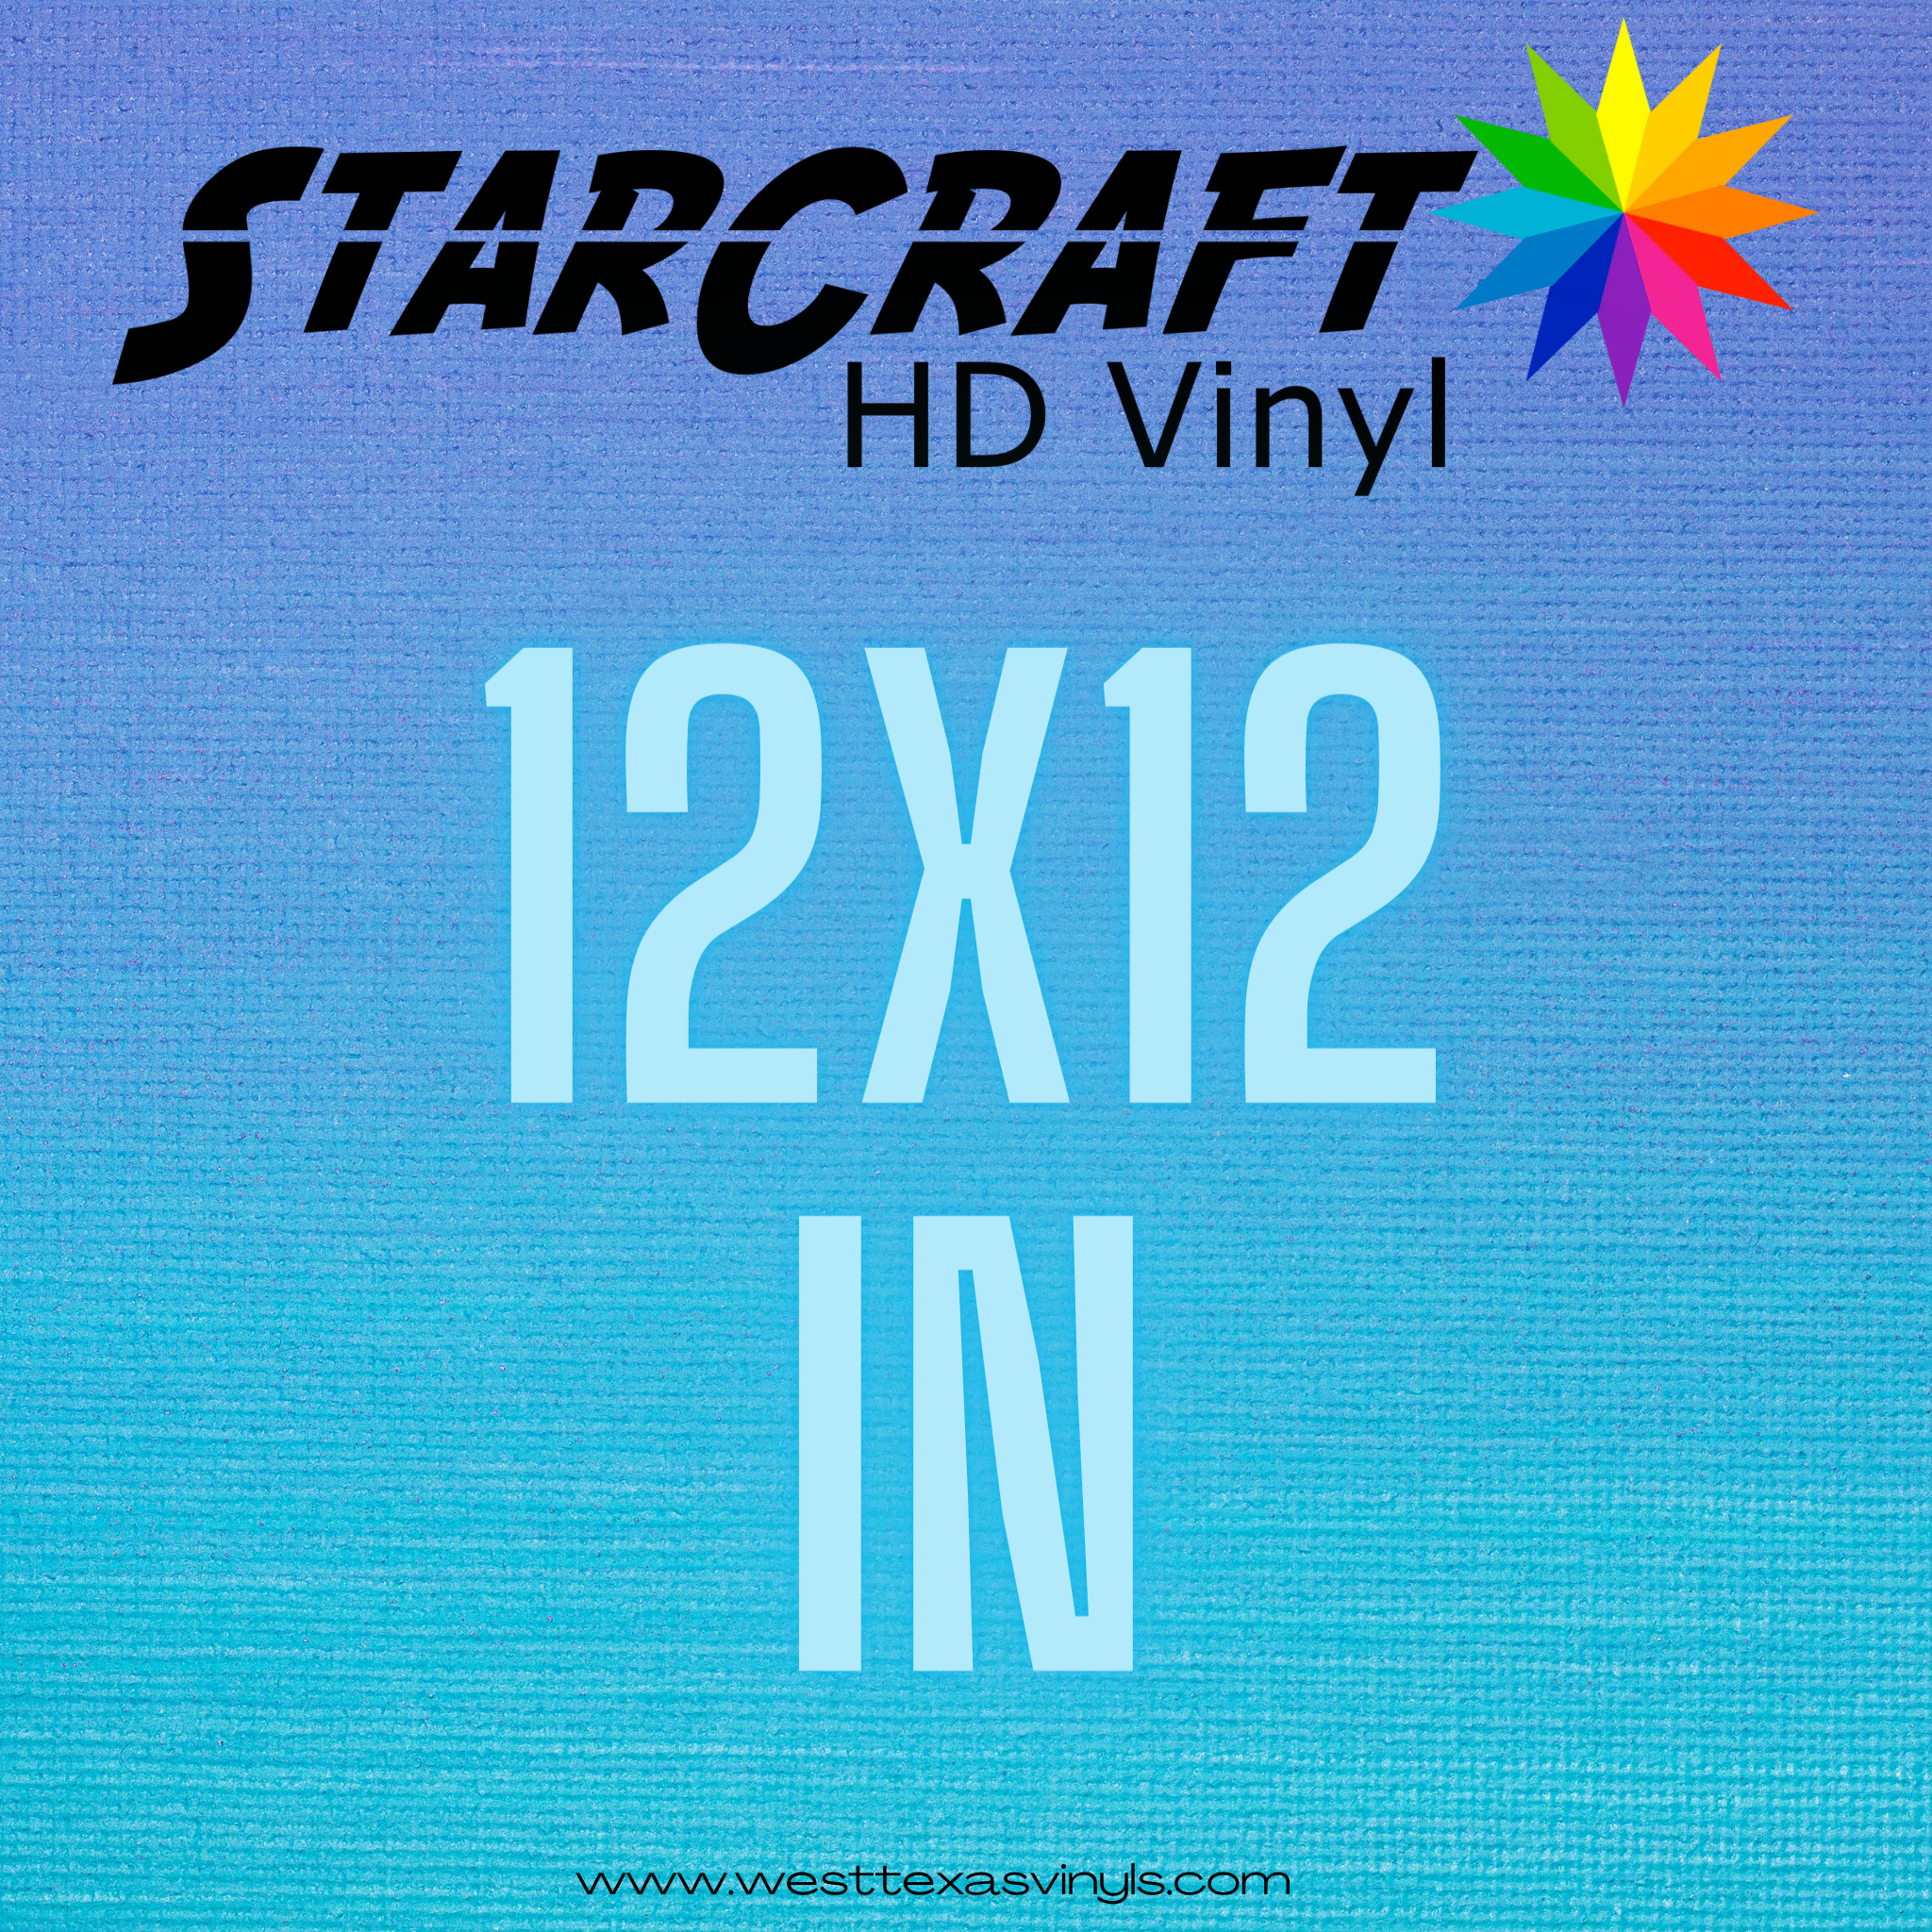 Starcraft HD Vinyl Color Swatch Ring by